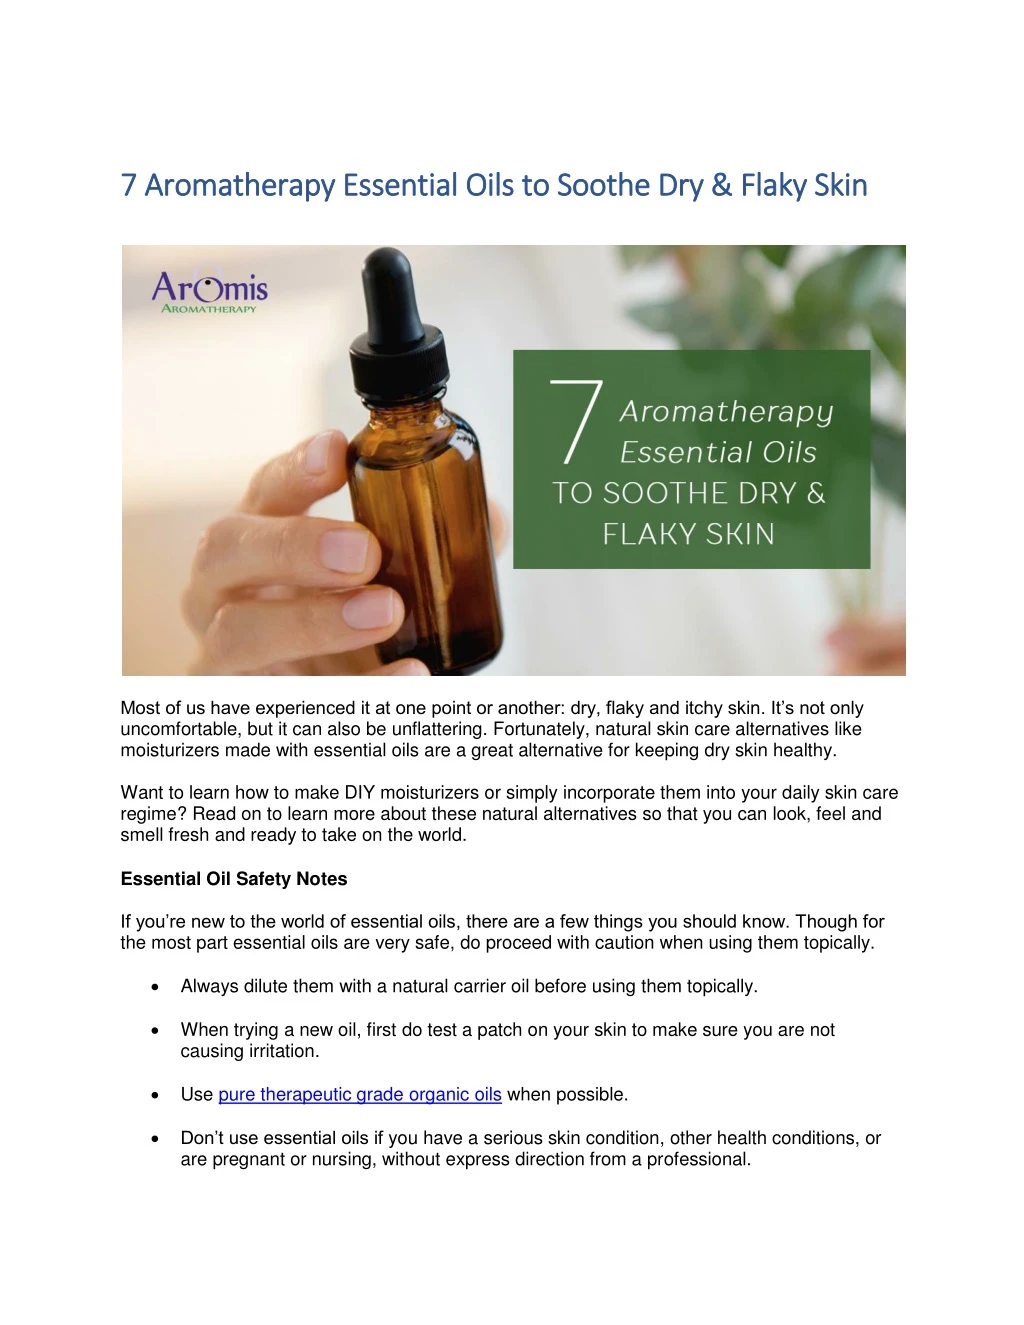 7 aromatherapy essential oils to soothe dry flaky